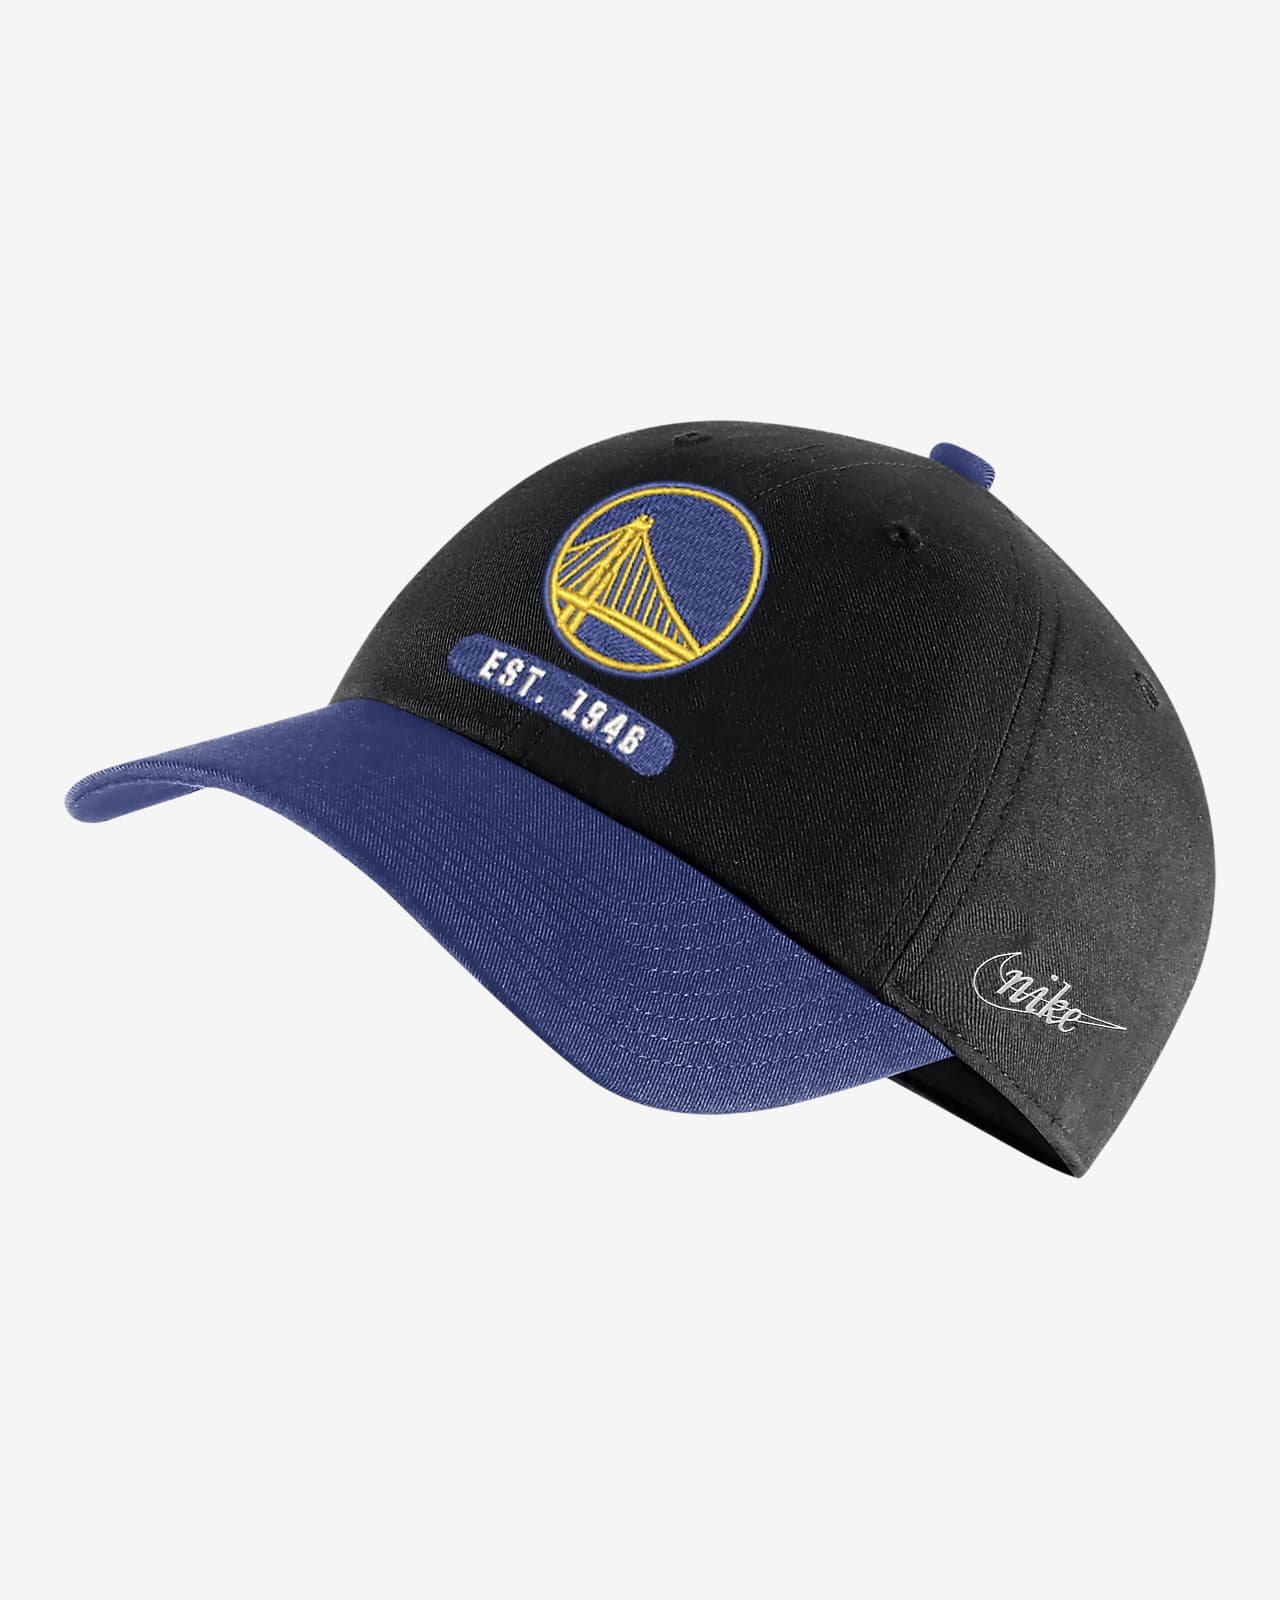 Golden State Warriors Heritage86 Icon Edition Nike NBA Cap